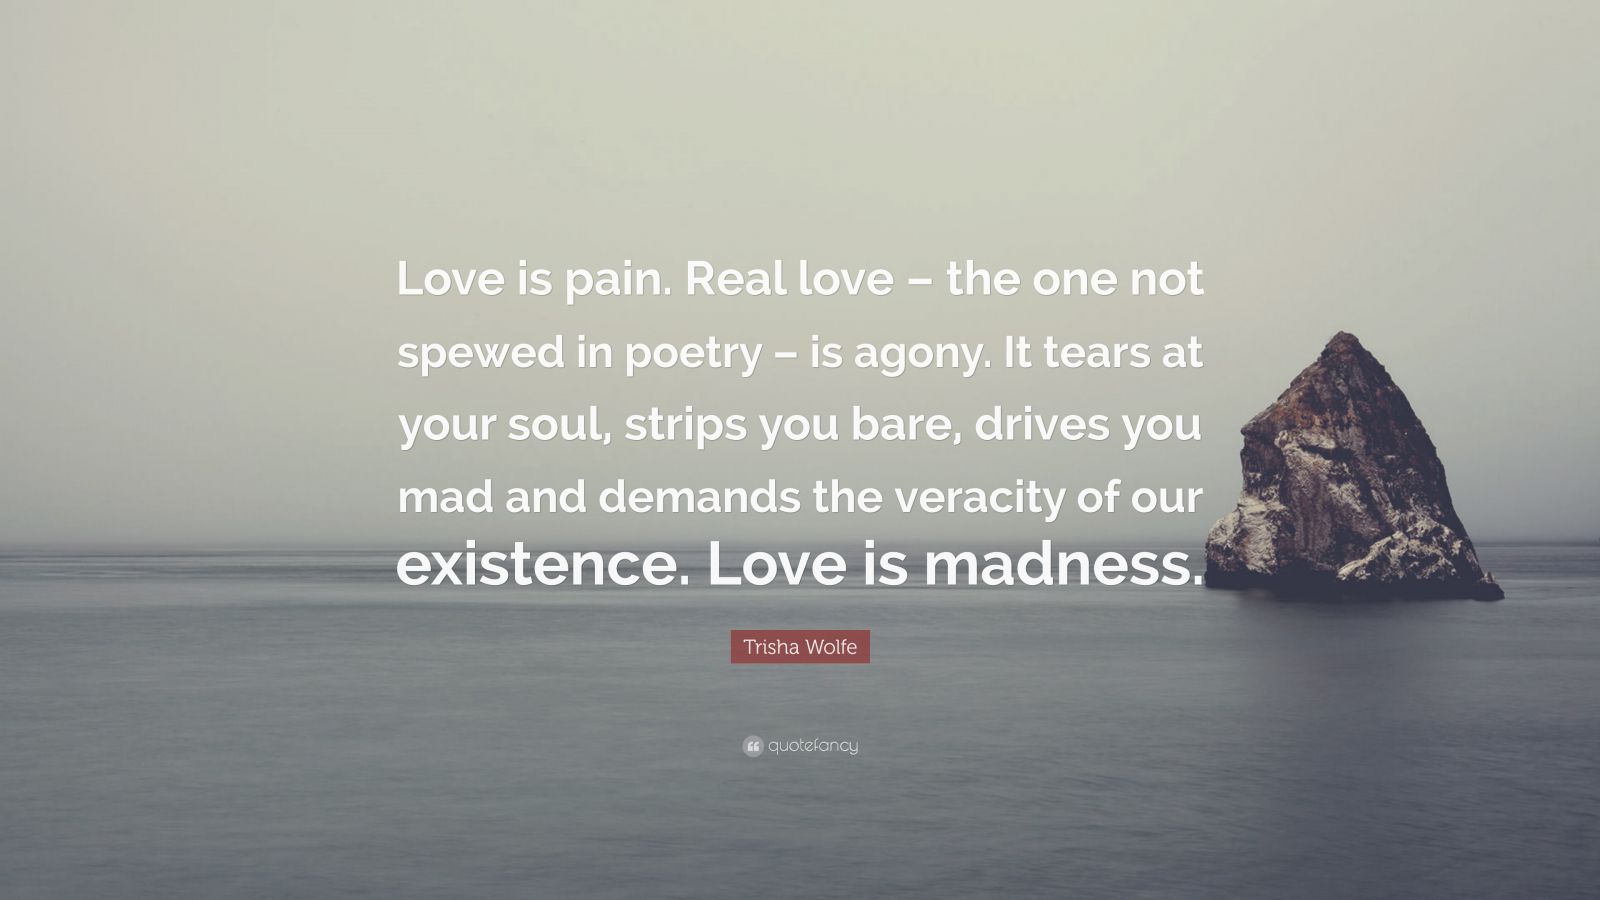 Trisha Wolfe Quote: “Love is pain. Real love – the one not spewed in poetry  – is agony. It tears at your soul, strips you bare, drives you ma”